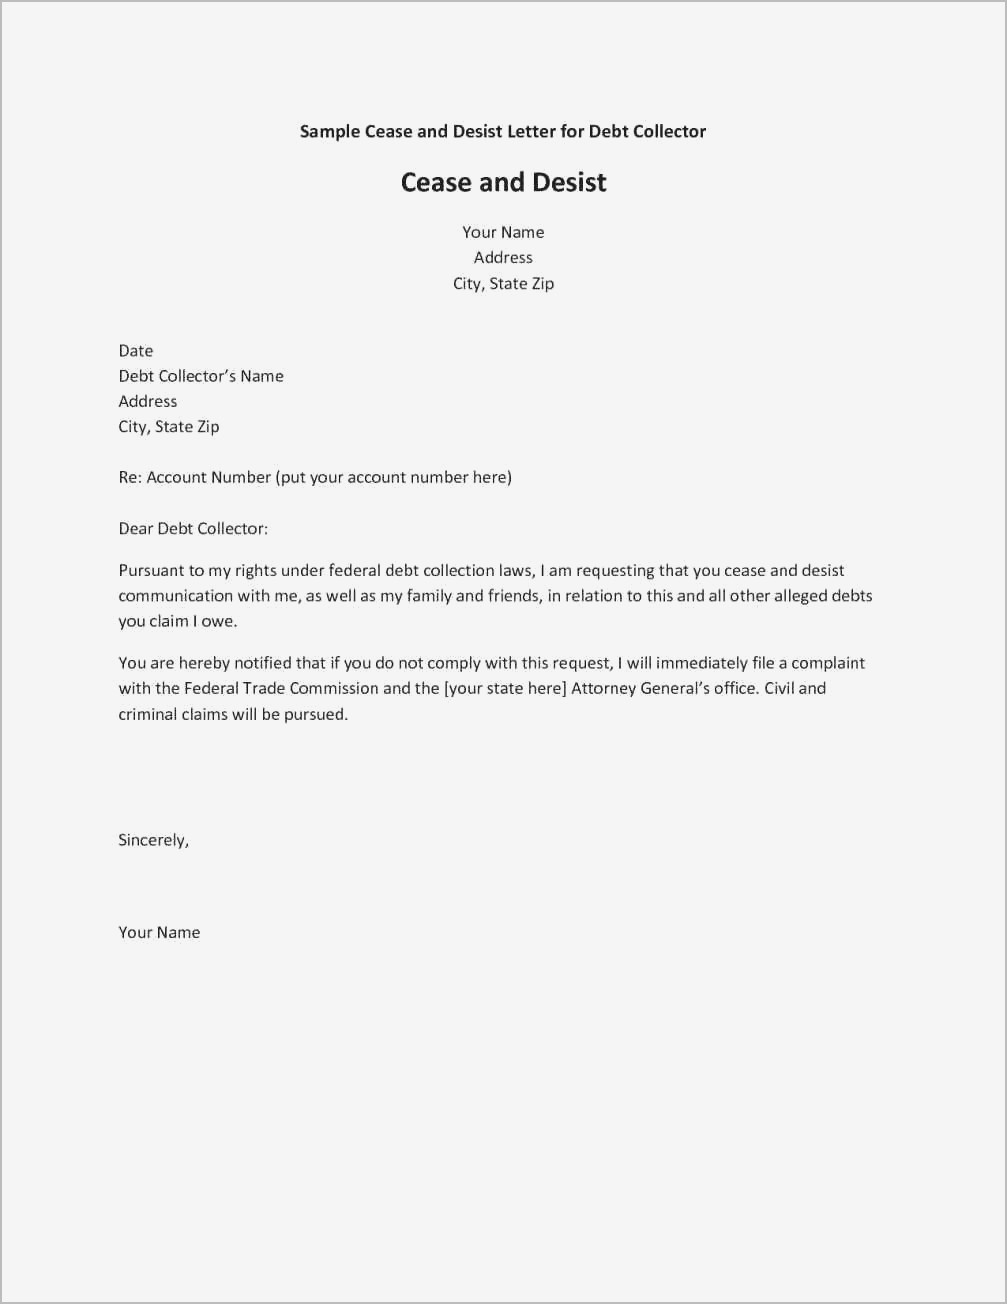 California Cease and Desist Letter Template - Inspirational Cease and Desist Letter Example Your Template